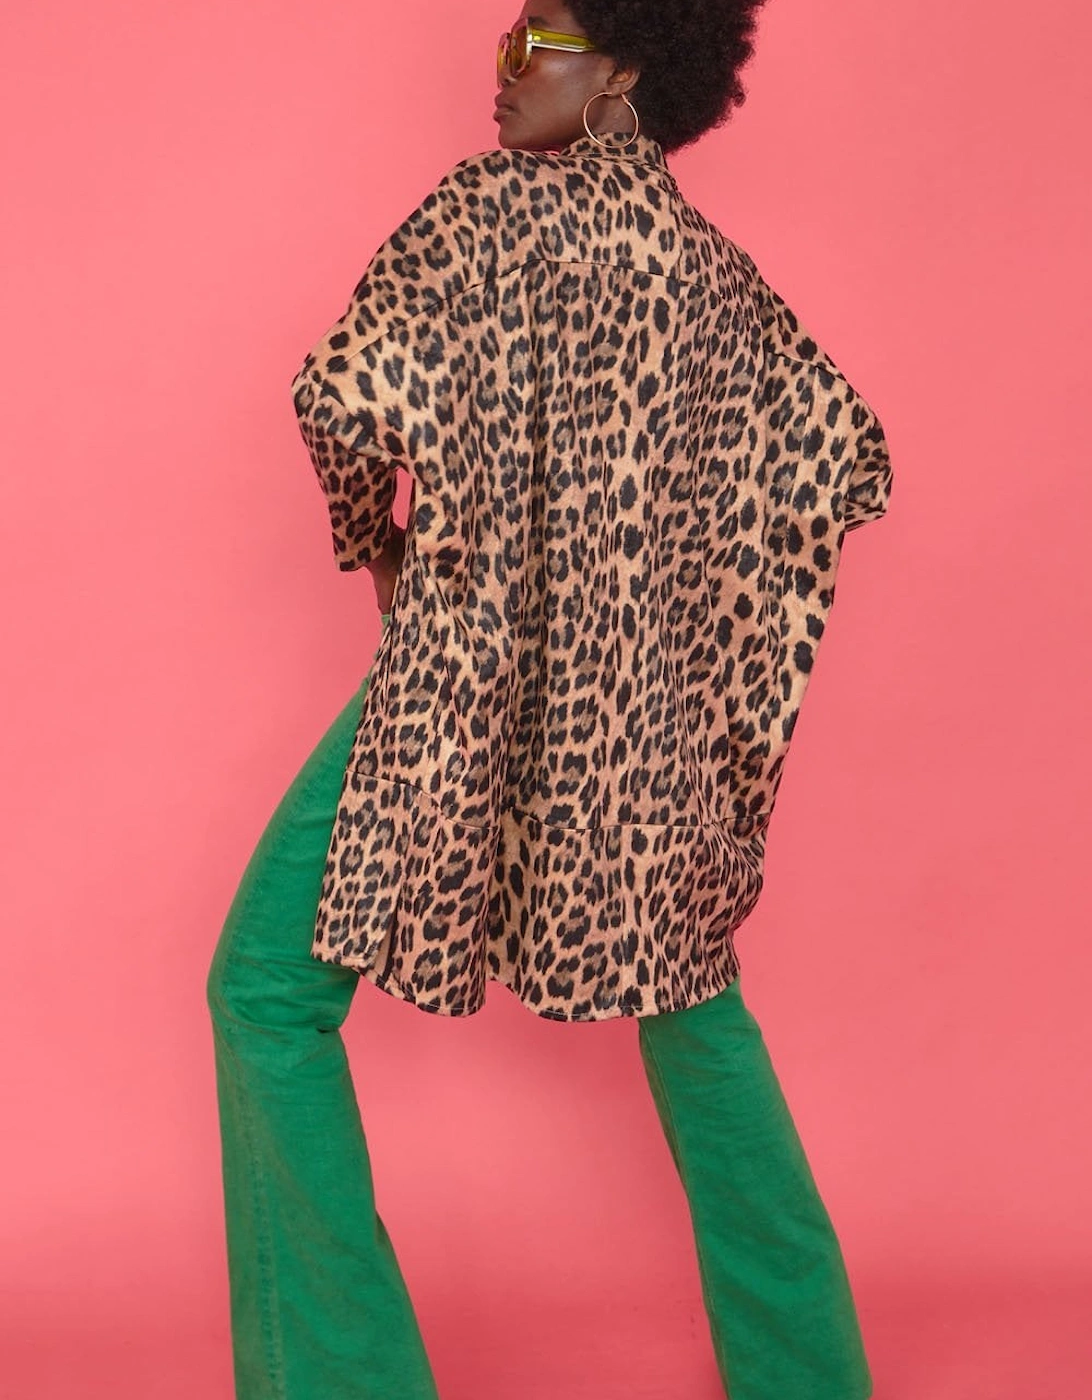 Leopard Print Faux Suede Leopard Print Trench Style Jacket